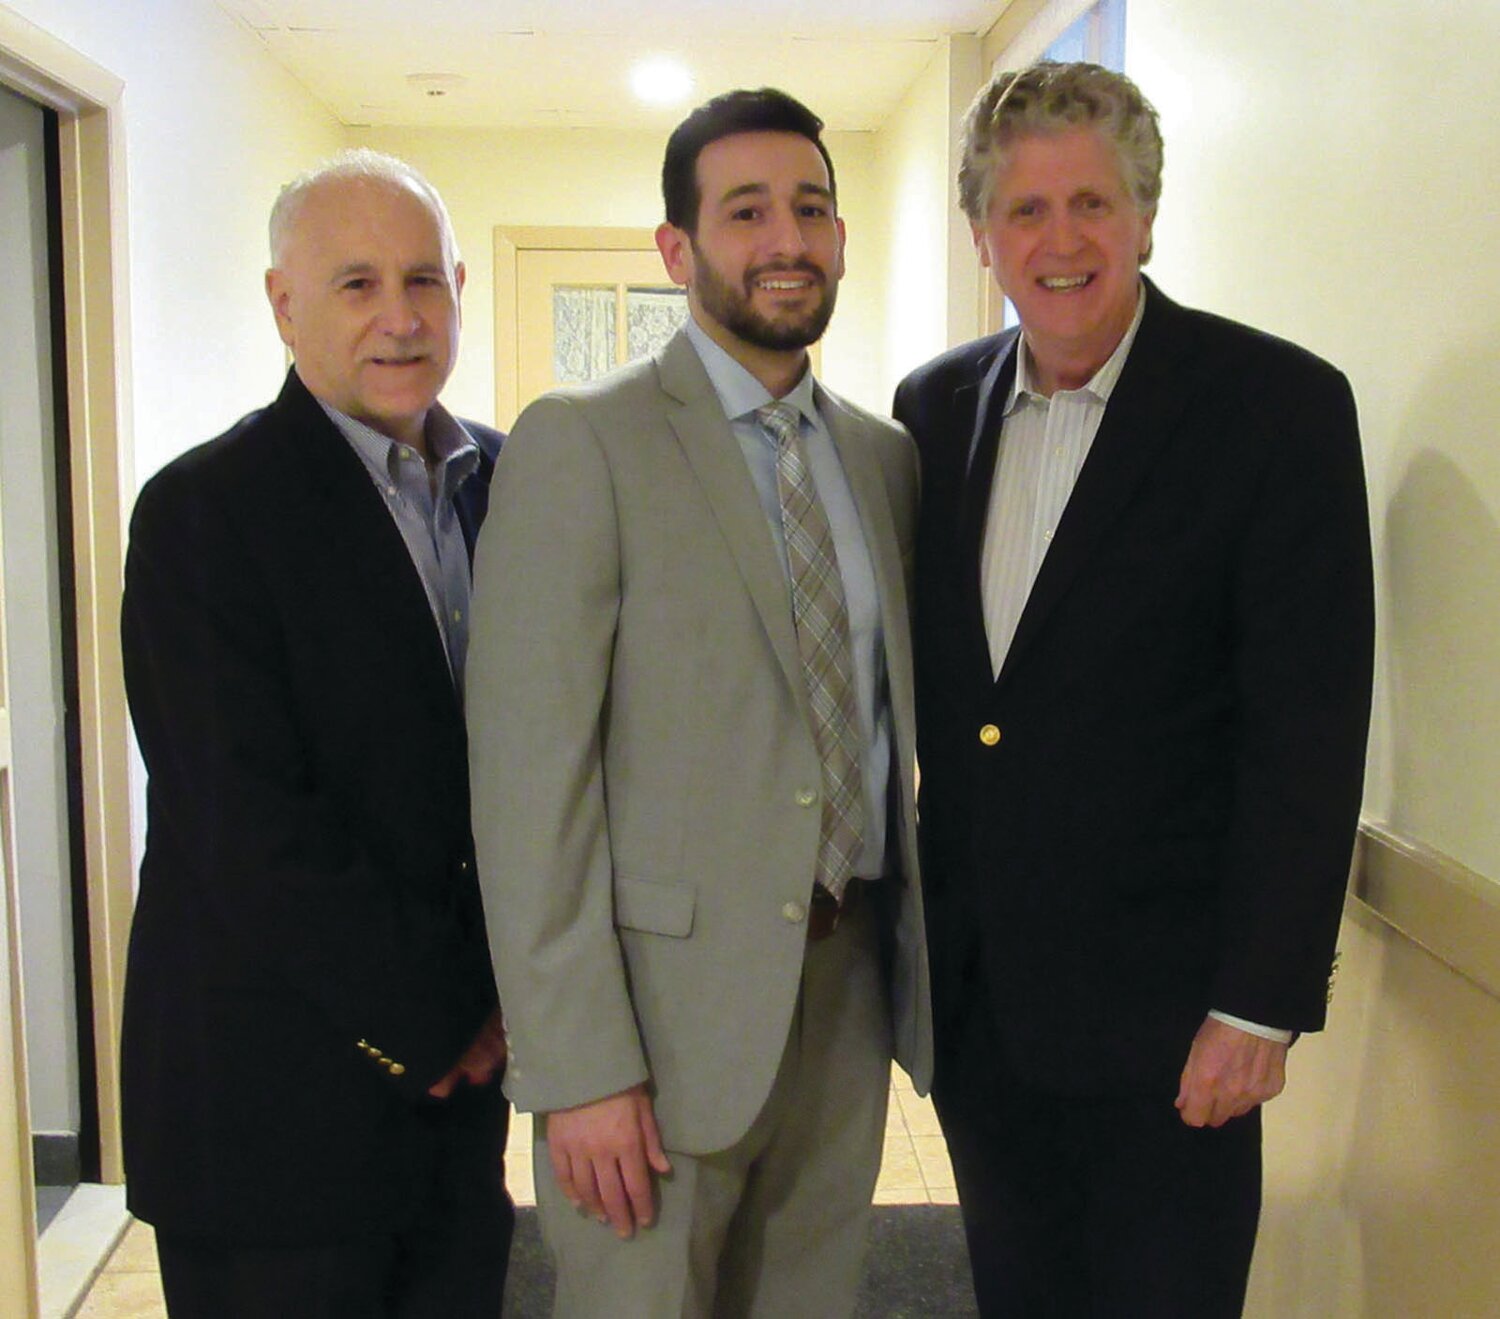 HAPPIER TIMES: Former Johnston Mayor Joseph Polisena Sr. and his son Joseph M. Polisena Jr. posed with then-Lt. Gov. Dan McKee at the younger Polisena’s first political fundraiser in 2019. McKee went on to become Rhode Island’s governor and Polisena succeeded his father as mayor. A fissure seems to have formed between the pair of former political allies and “family friends.”